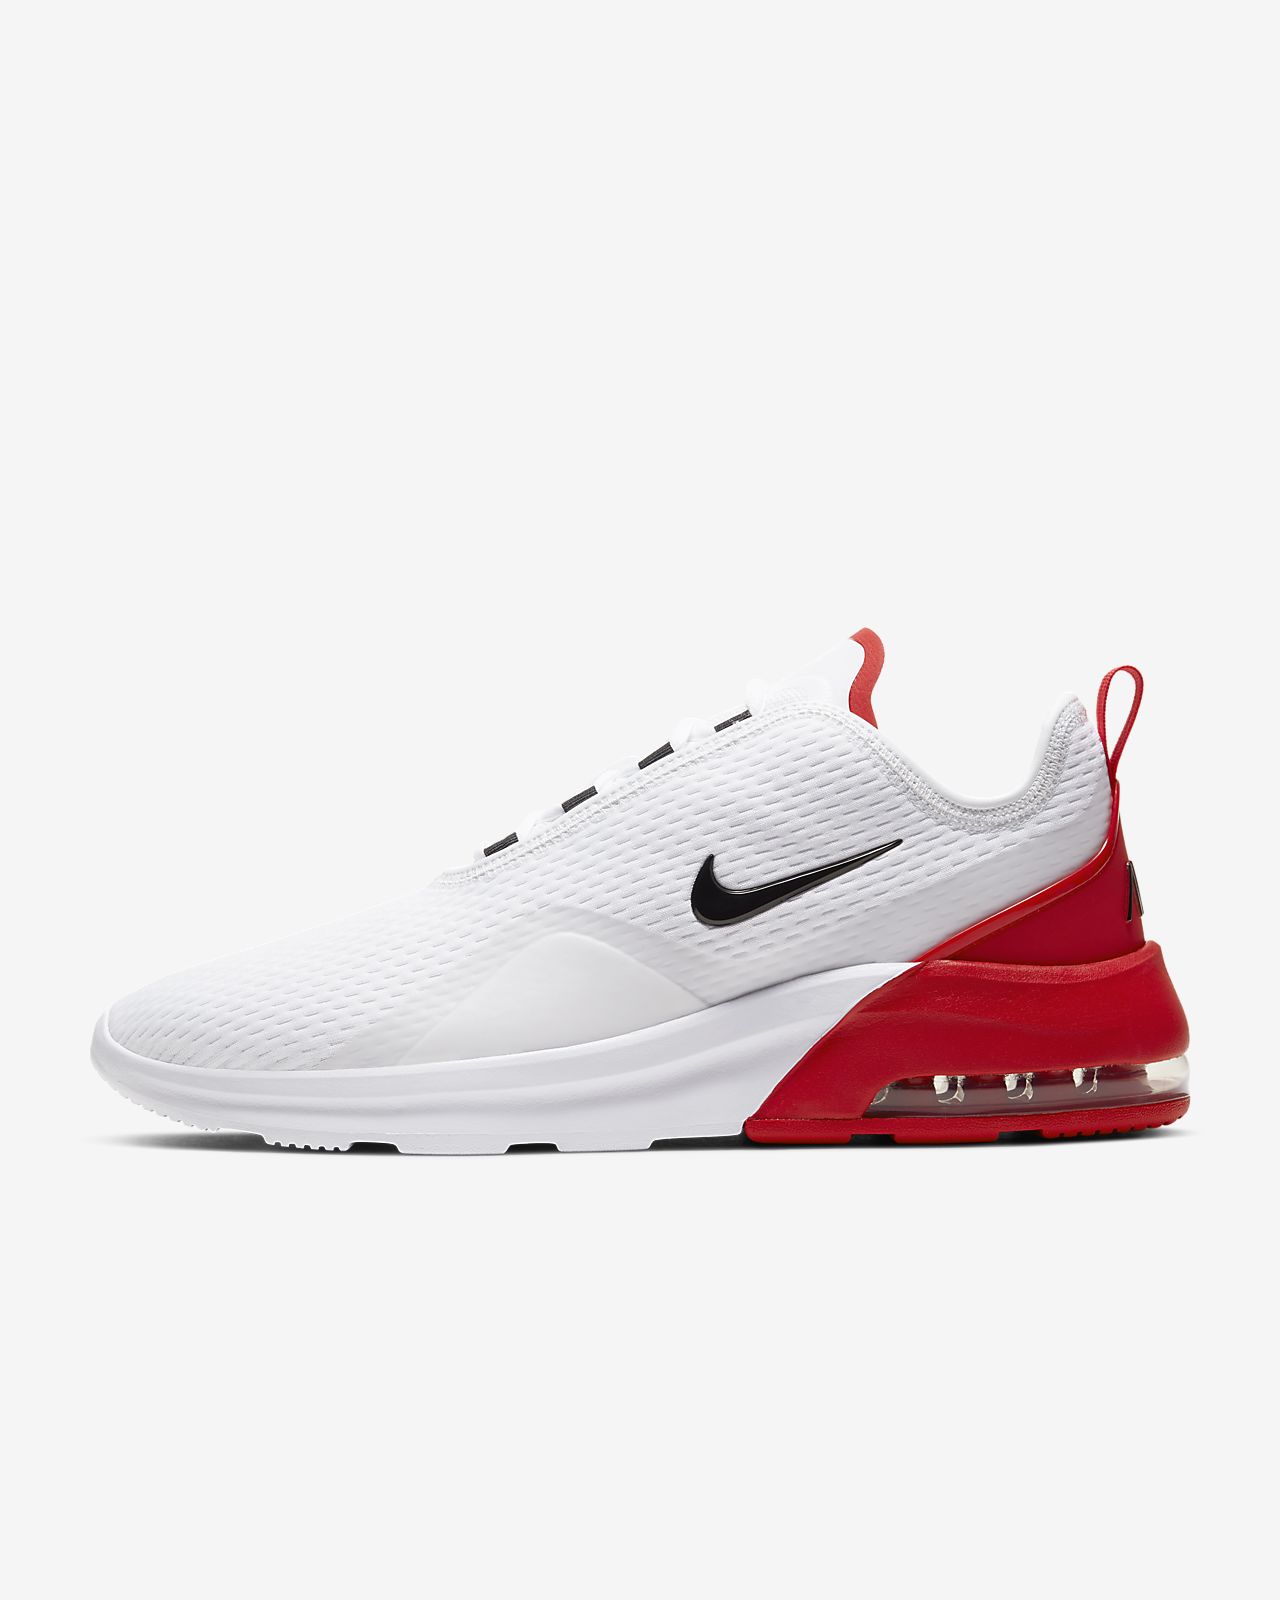 nike air max motion 2 red and black